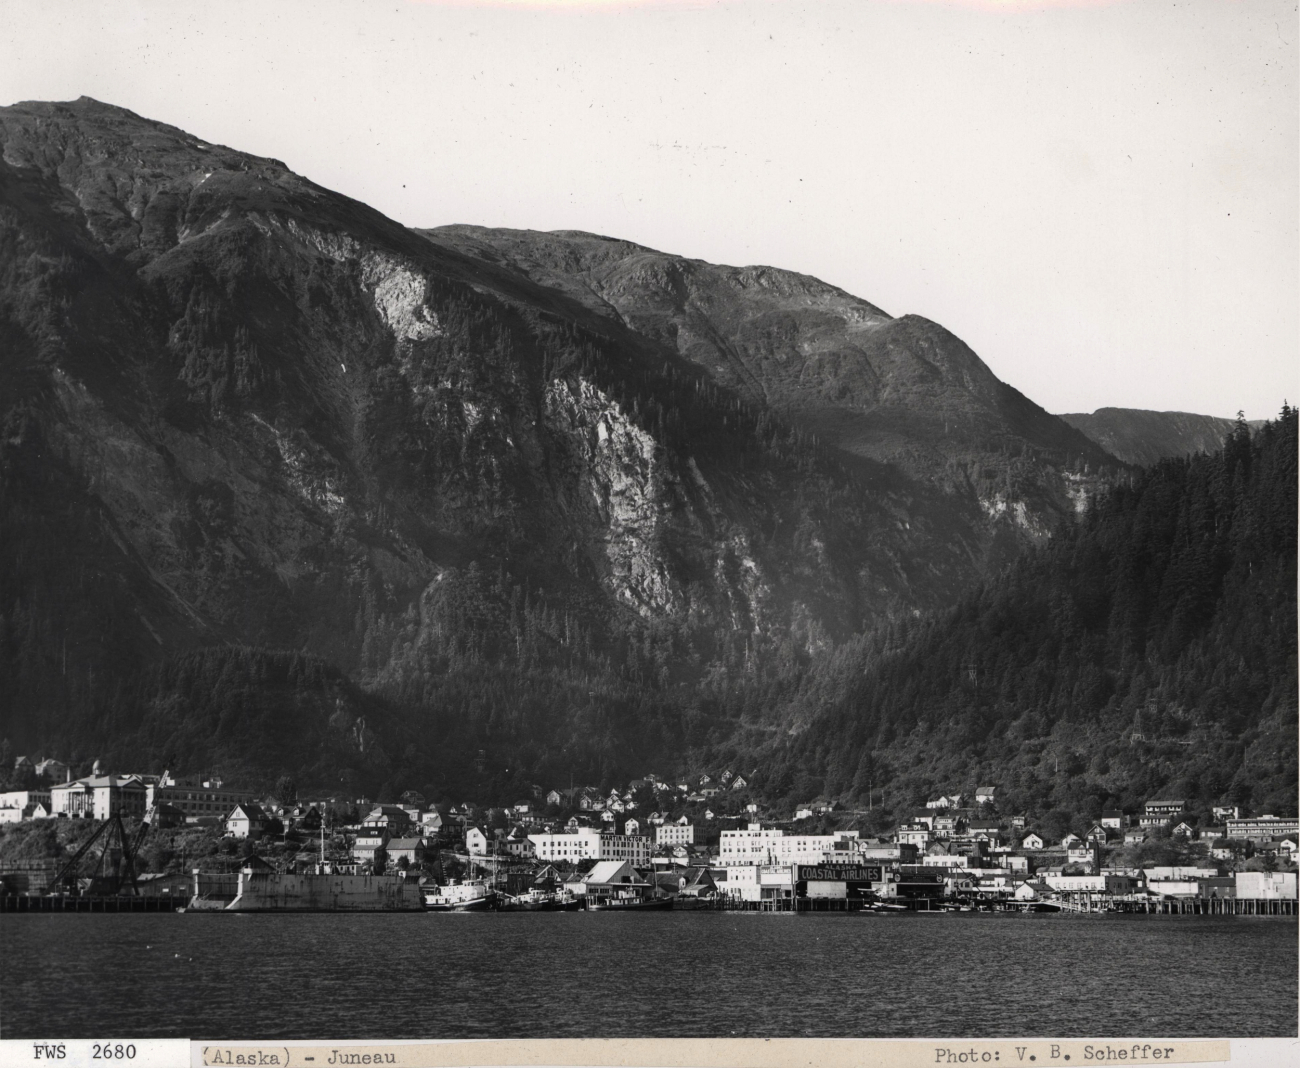 A view of Juneau from the water